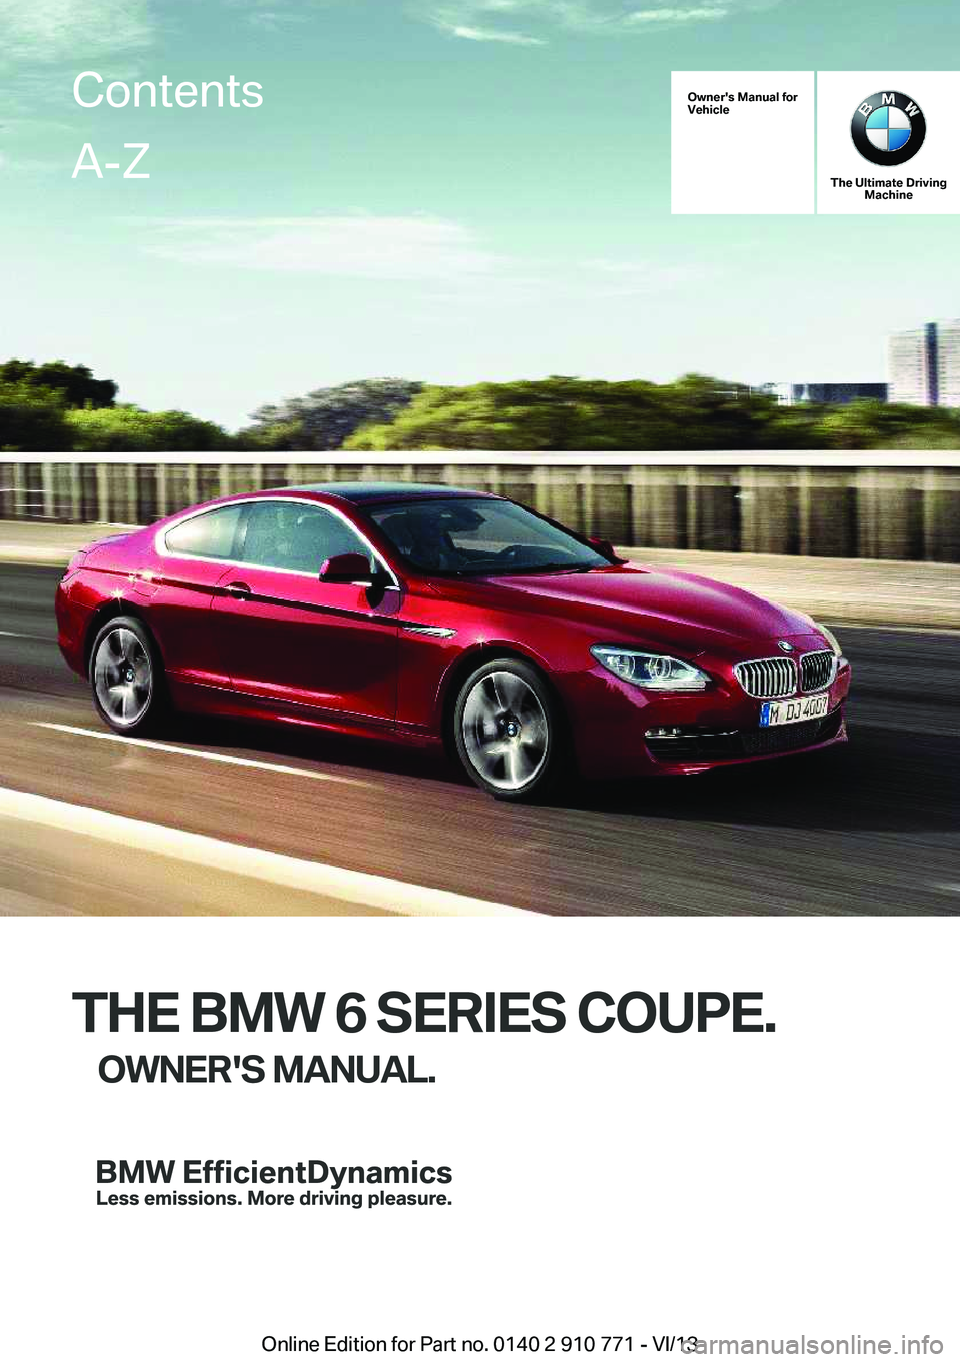 BMW 640I COUPE 2014  Owners Manual Owner's Manual for
Vehicle
The Ultimate Driving Machine
THE BMW 6 SERIES COUPE.
OWNER'S MANUAL.
ContentsA-Z
Online Edition for Part no. 0140 2 910 771 - VI/13   